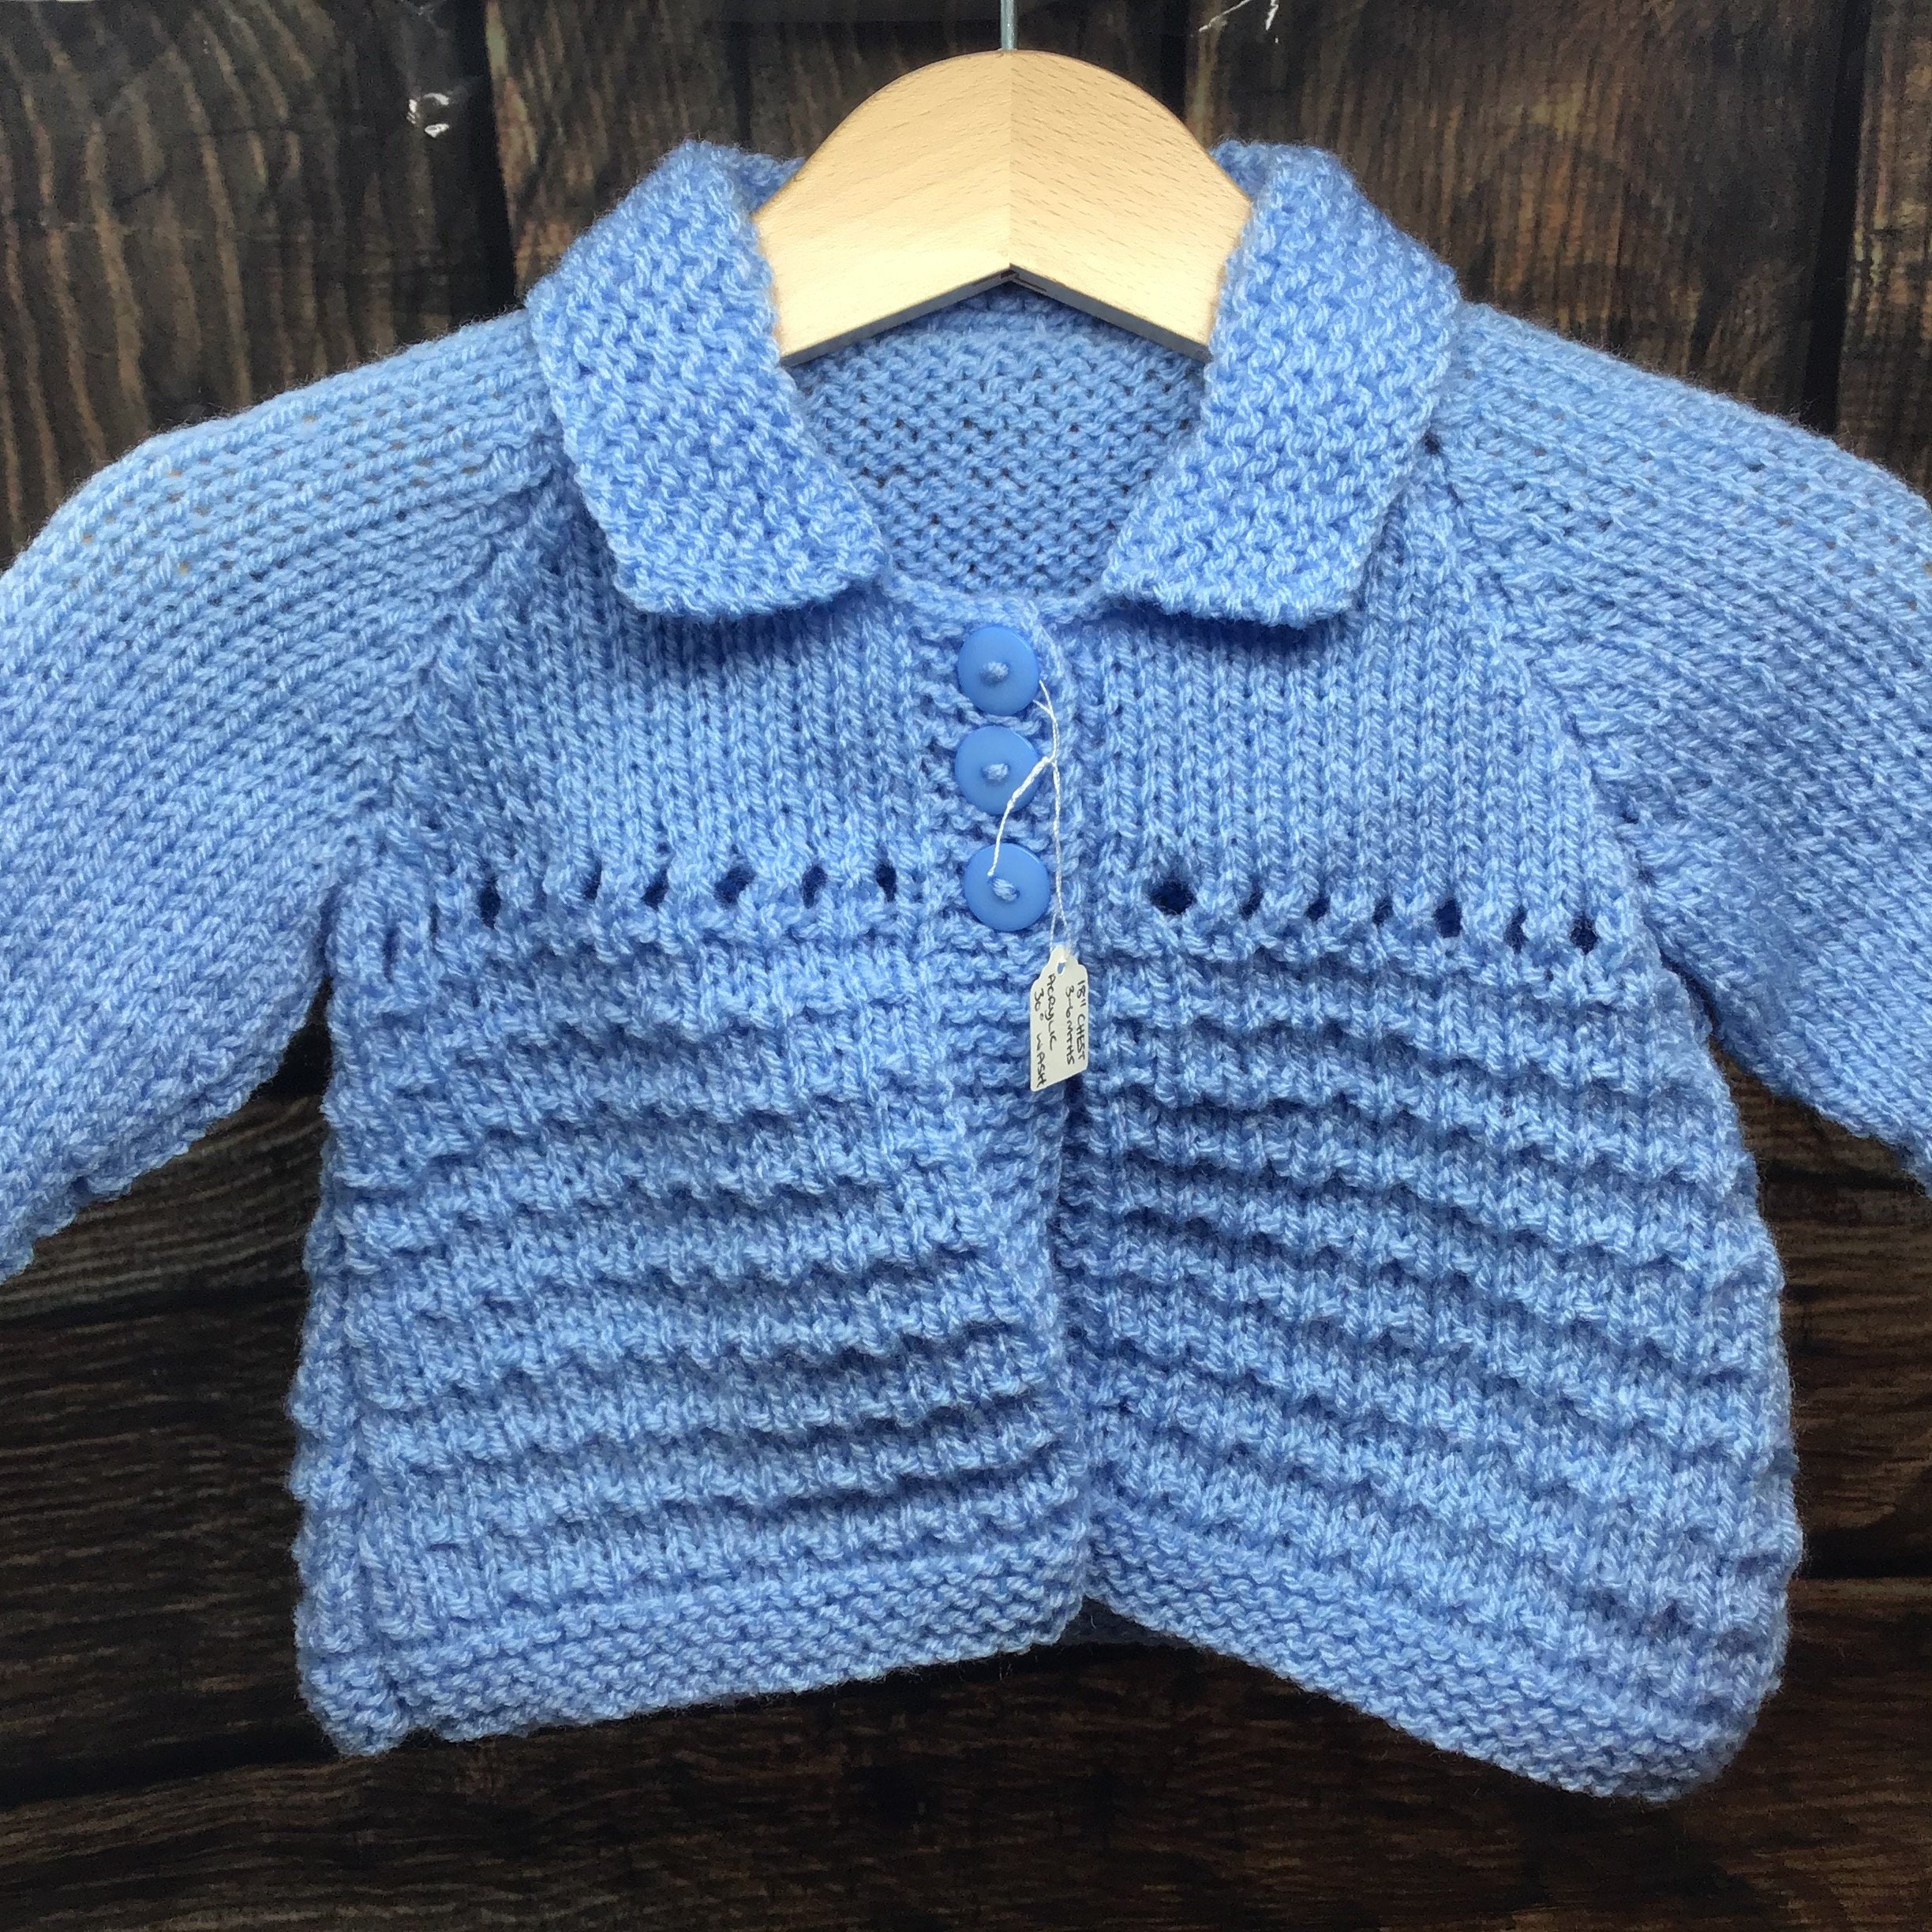 Hand knitted Baby/Childrens Matinee Jacket in Blue 3-6 | Etsy